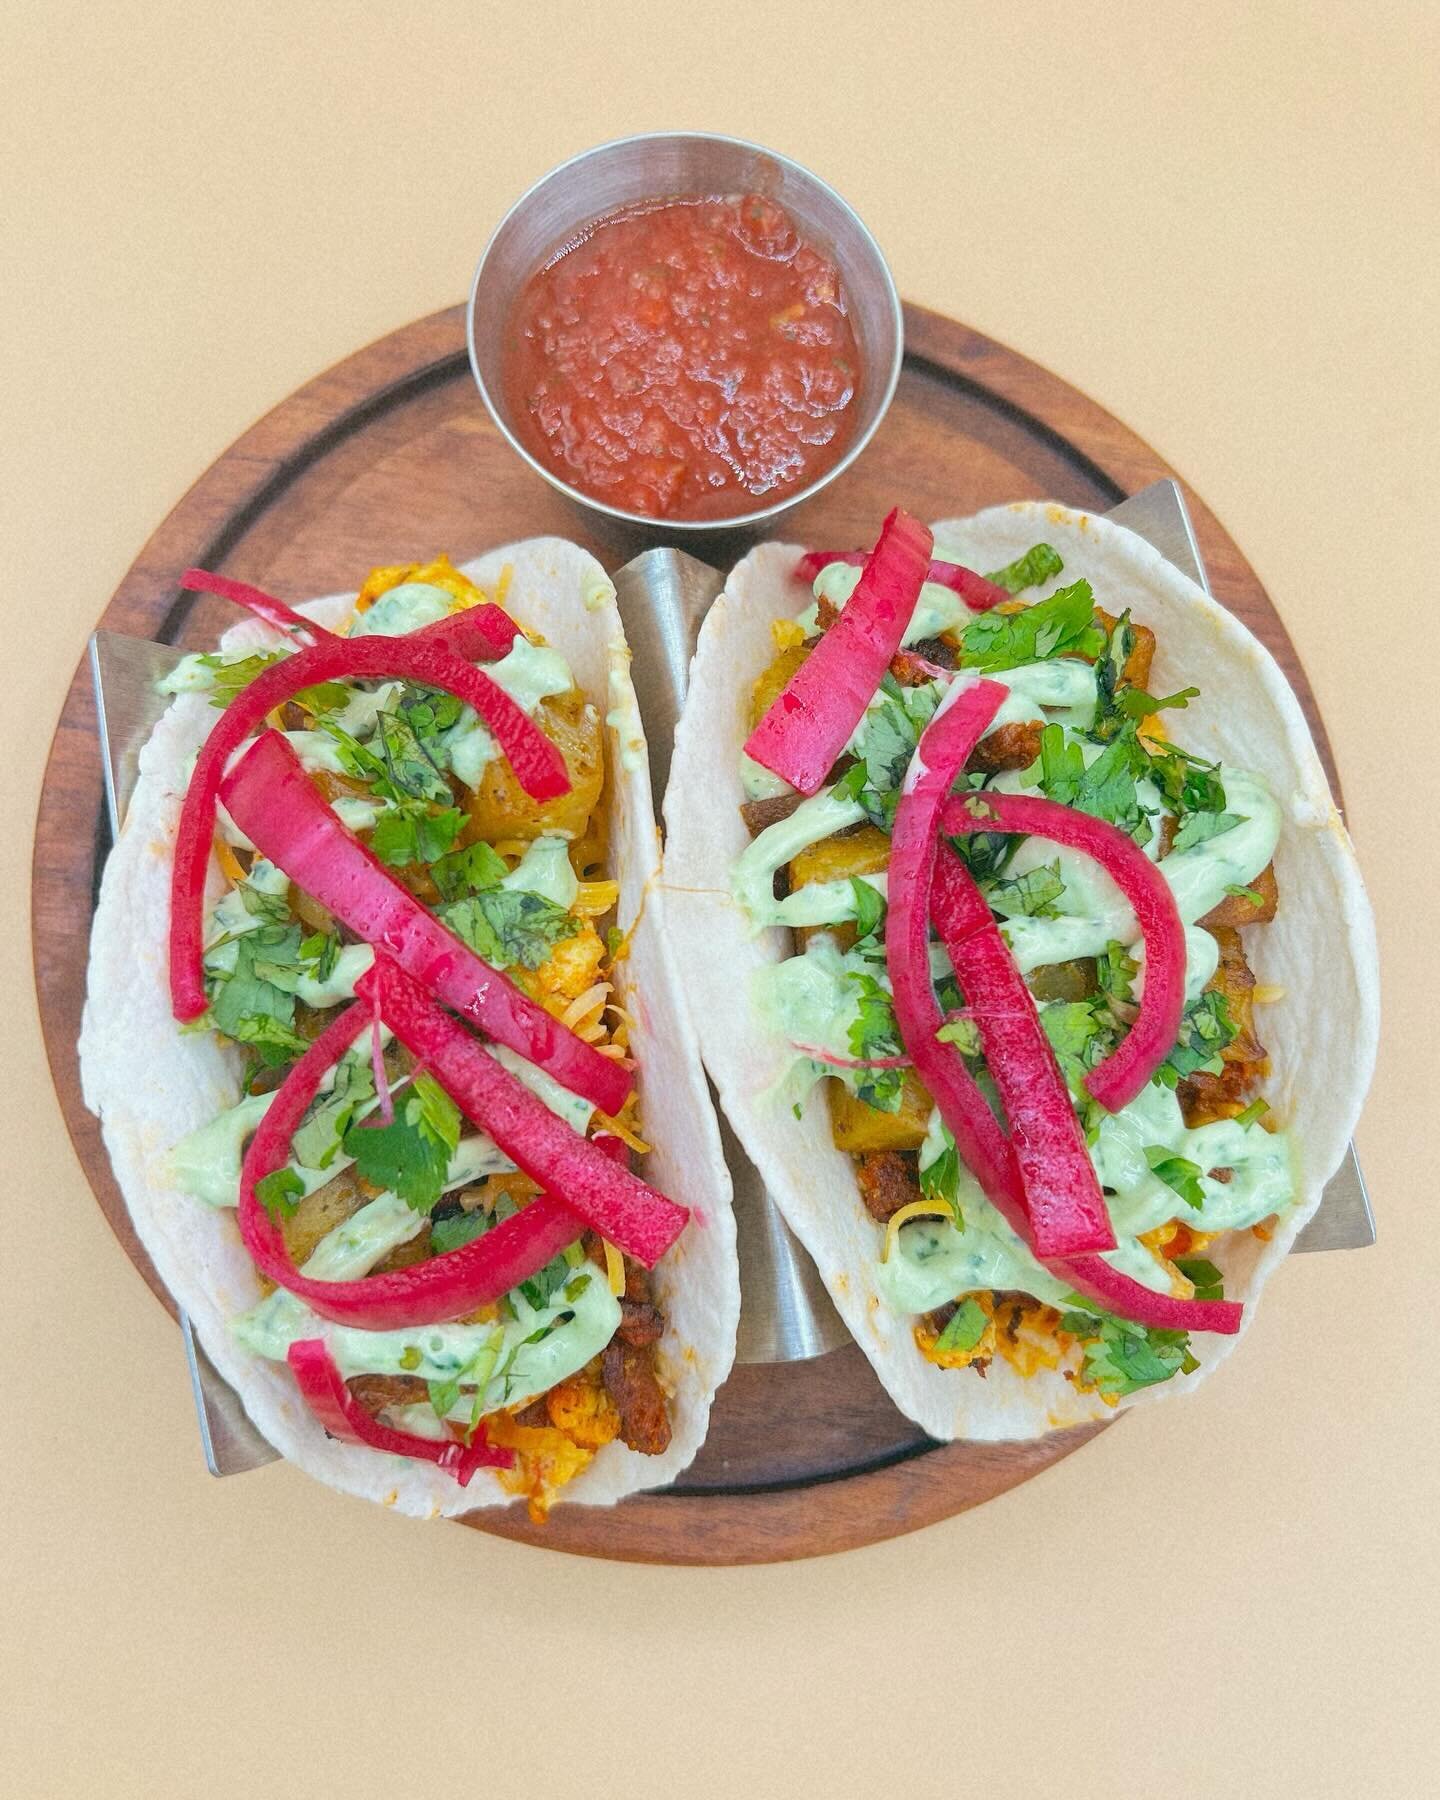 Now Serving&hellip;Chorizo Breakfast Tacos 🌮 Filled with egg, roasted potatoes, chorizo, cheese and topped with avocado cr&eacute;ma, pickled onions and cilantro. They&rsquo;re too good to resist 🔥 Have you gotten a taste yet? 

#txlocal #arlington